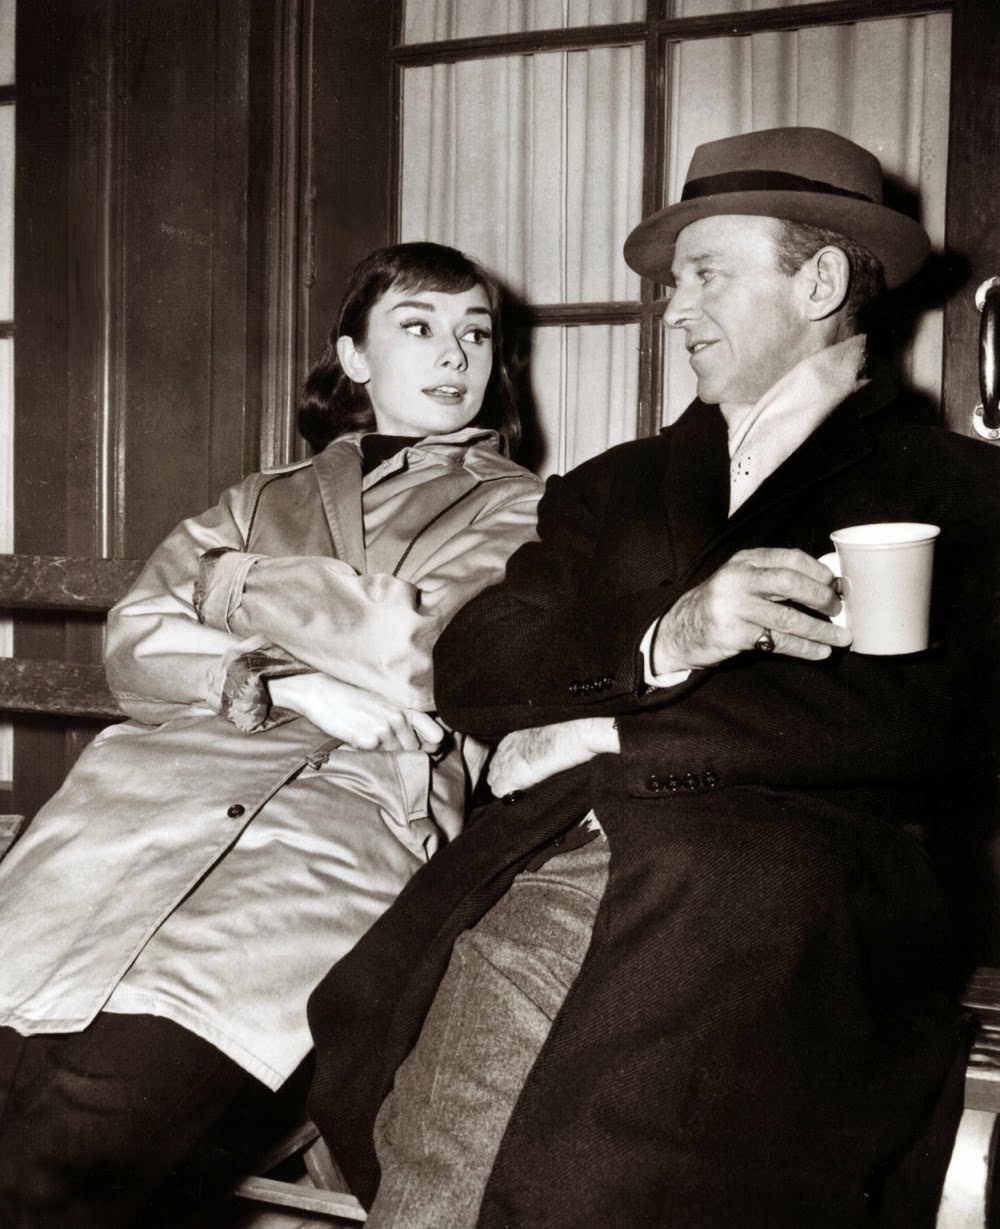 Amazing Historical Photo of Audrey Hepburn with Fred Astaire in 1953 